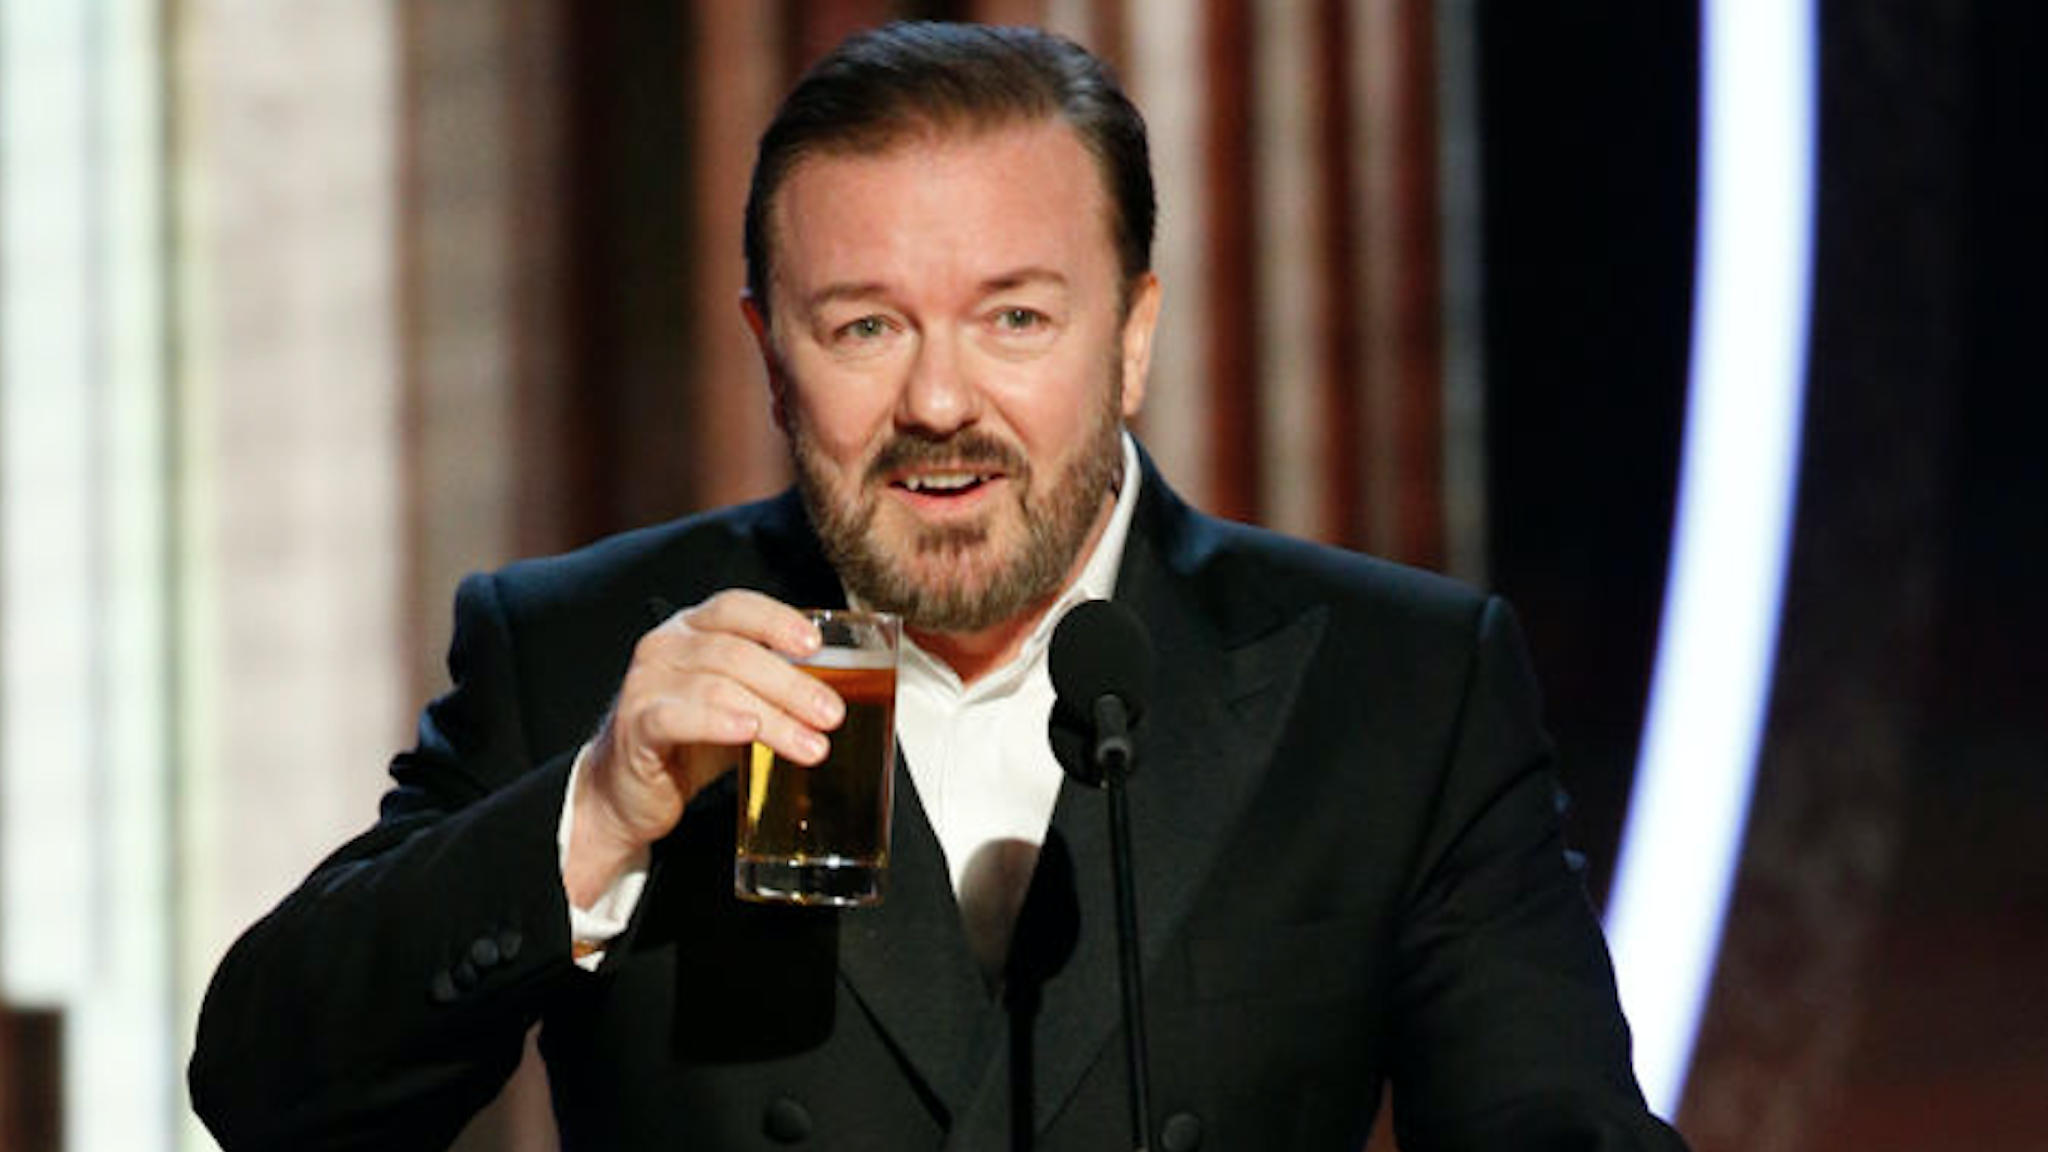 n this handout photo provided by NBCUniversal Media, LLC, host Ricky Gervais speaks onstage during the 77th Annual Golden Globe Awards at The Beverly Hilton Hotel on January 5, 2020 in Beverly Hills, California.